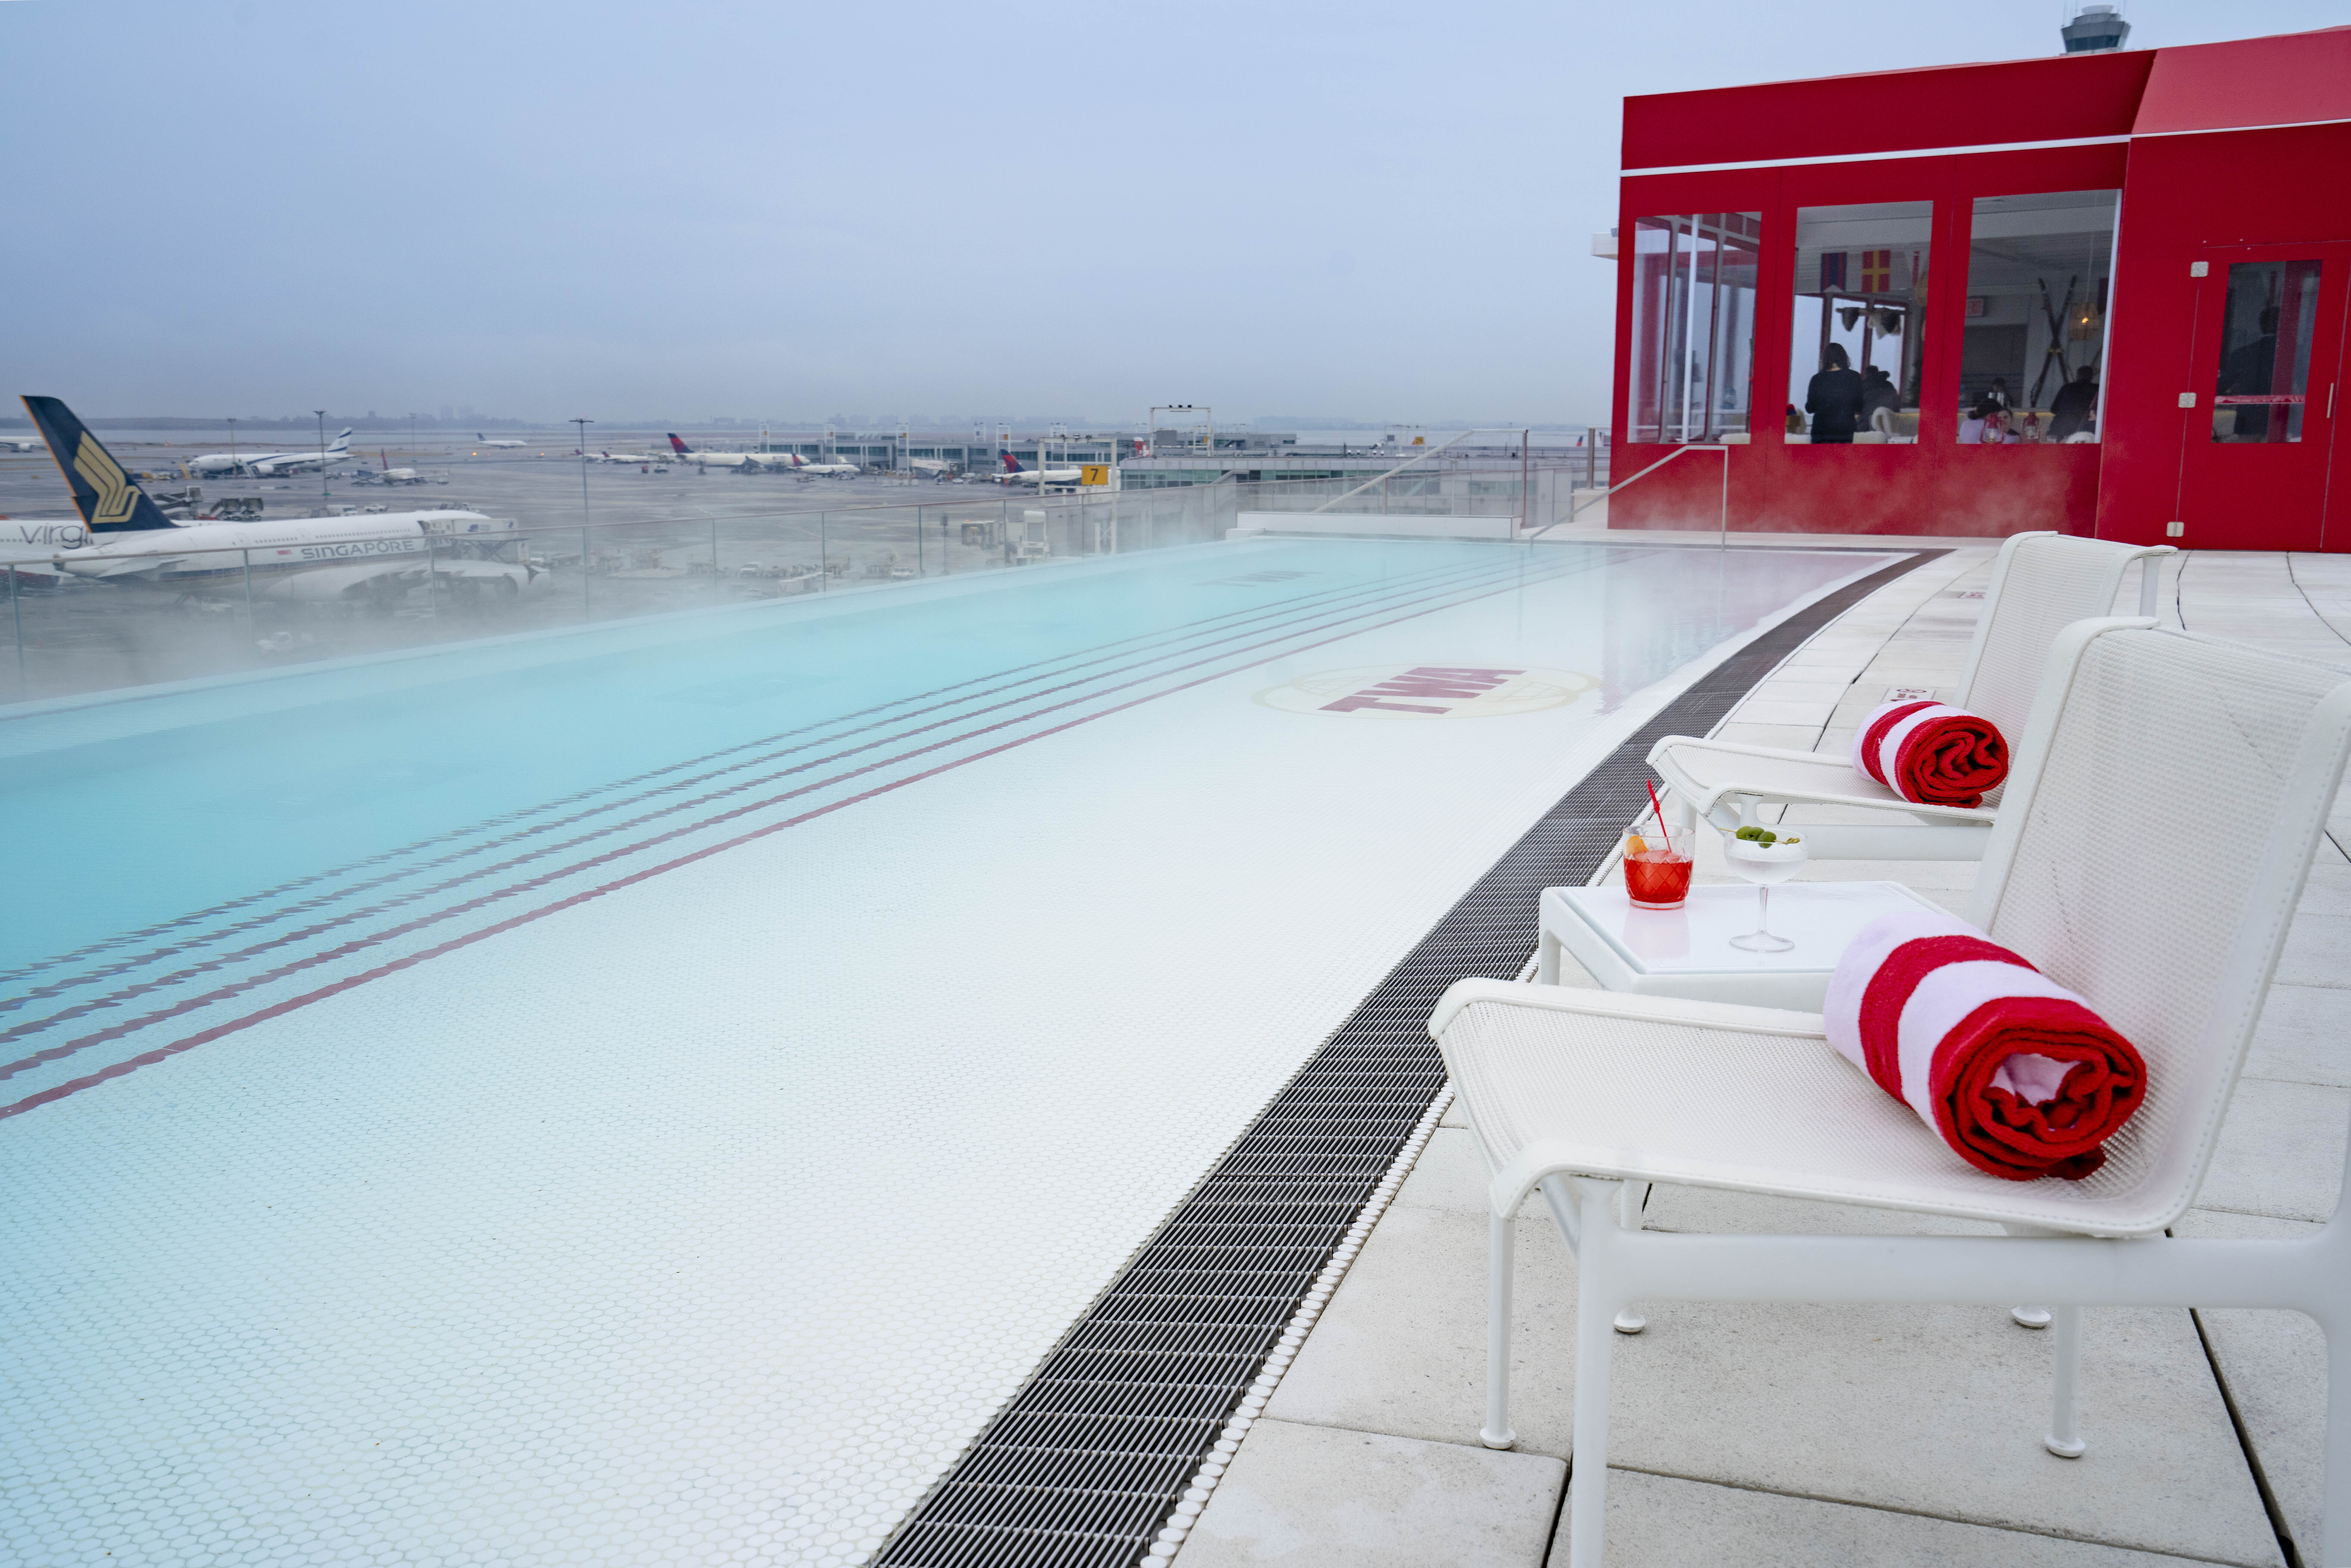 The pool is located on the TWA Hotel roof overlooking JFK’s runway 4L/22R.